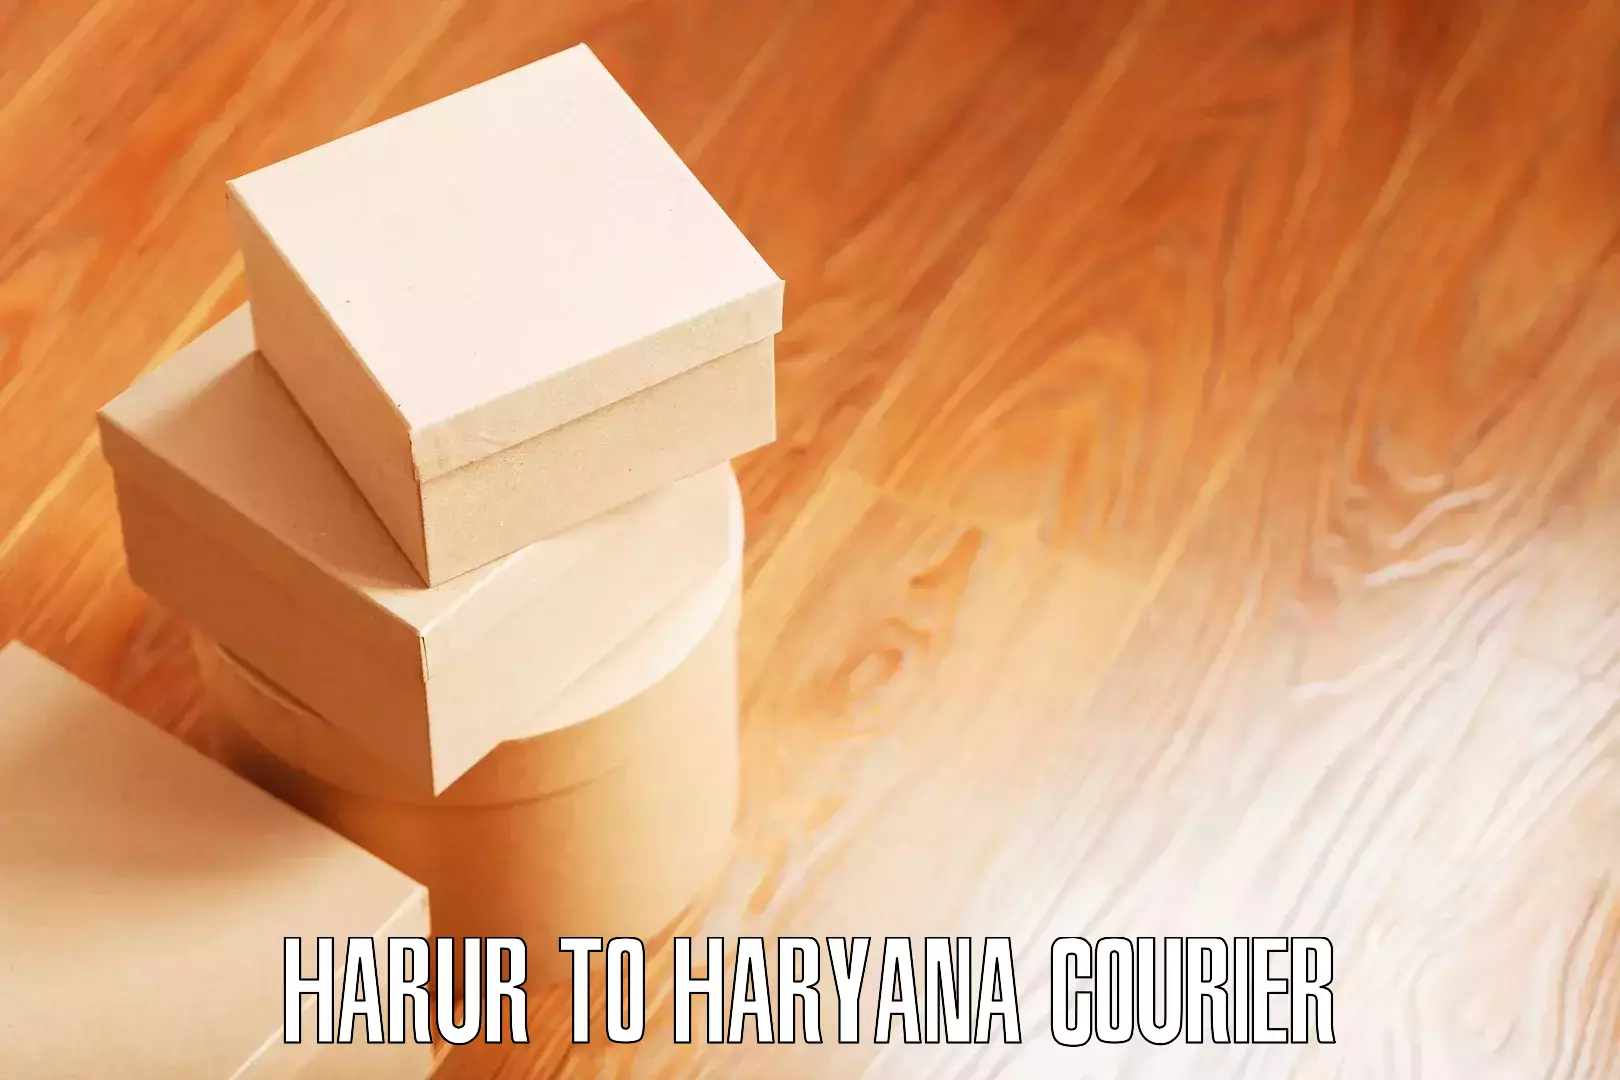 Expert goods movers Harur to Fatehabad